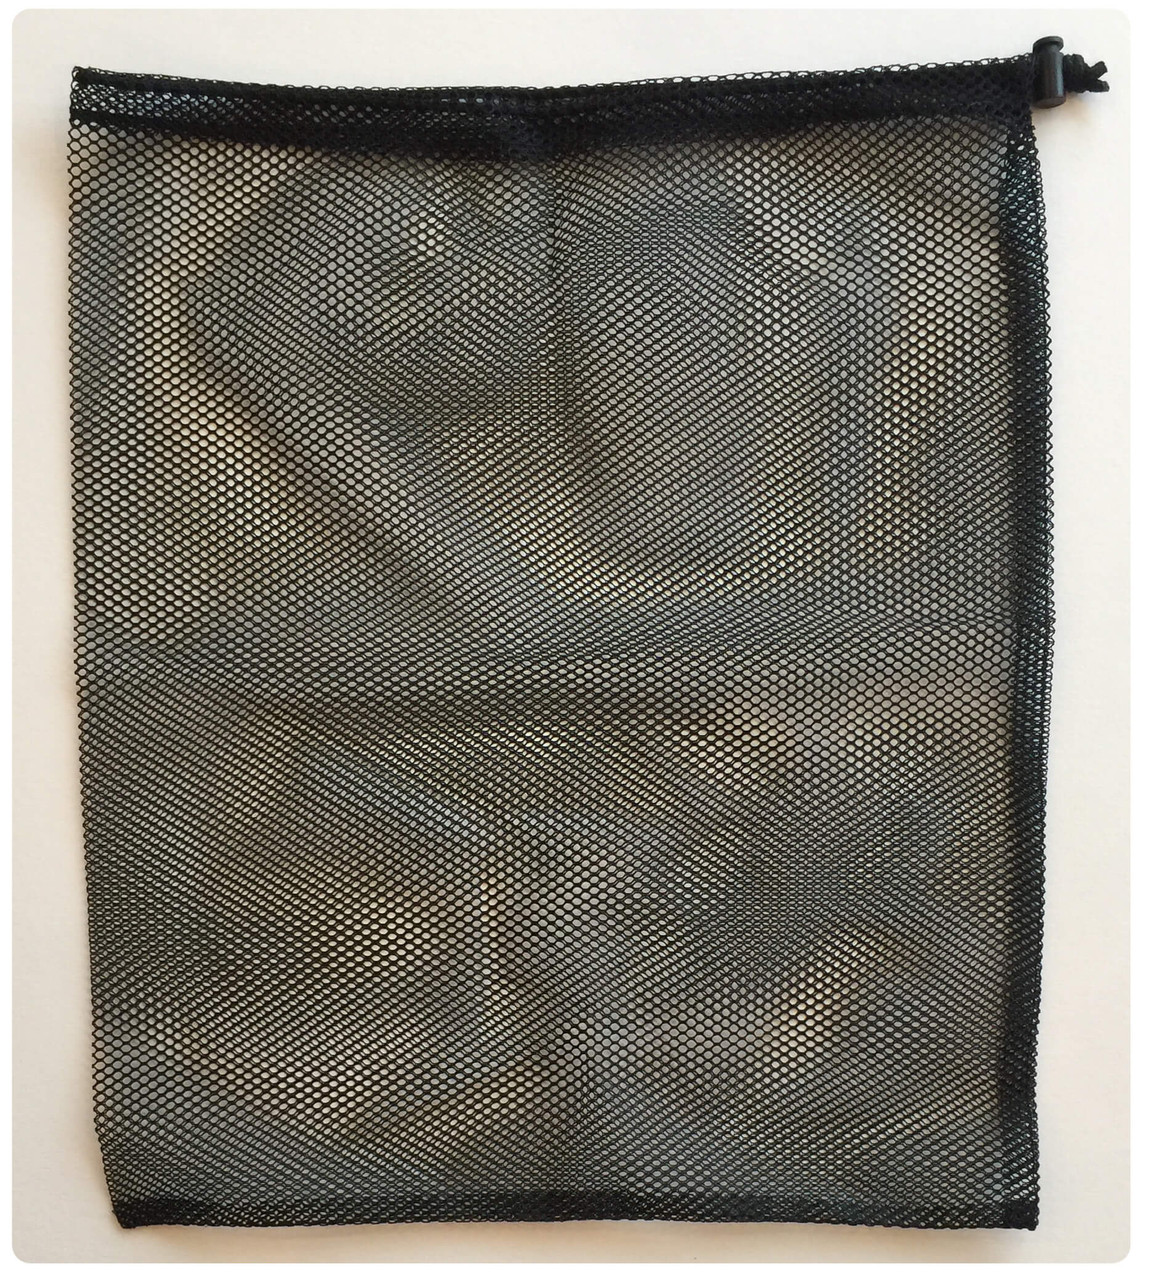 Two Mesh Carry Bags